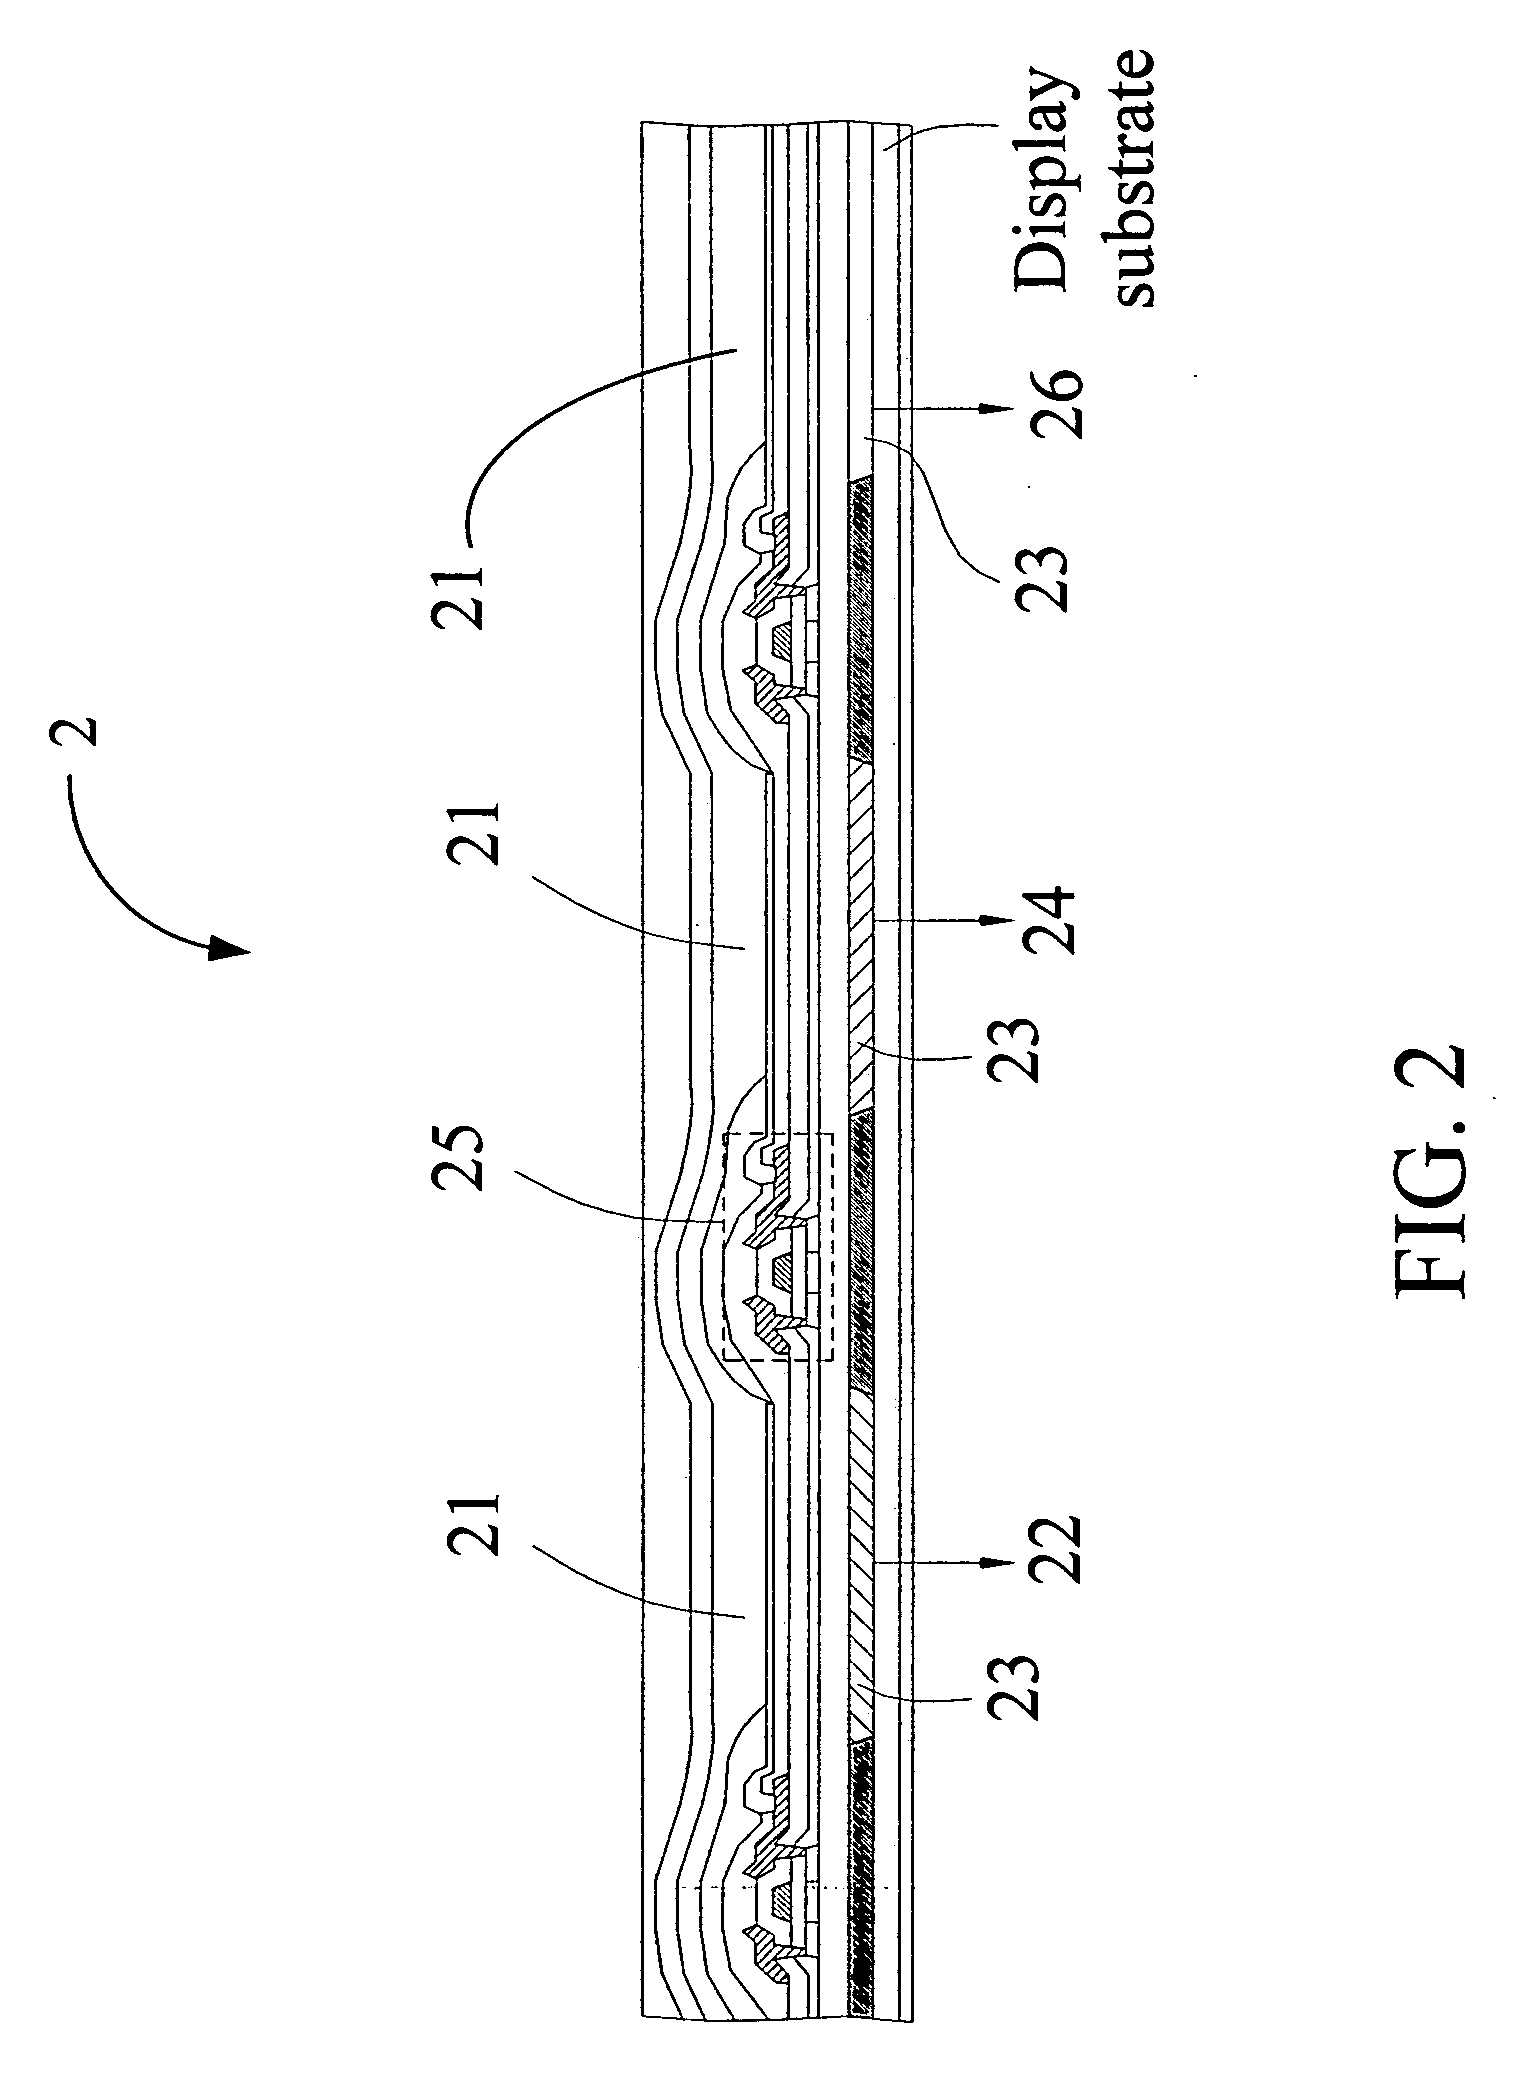 White organic electroluminescent elements and displays using the same